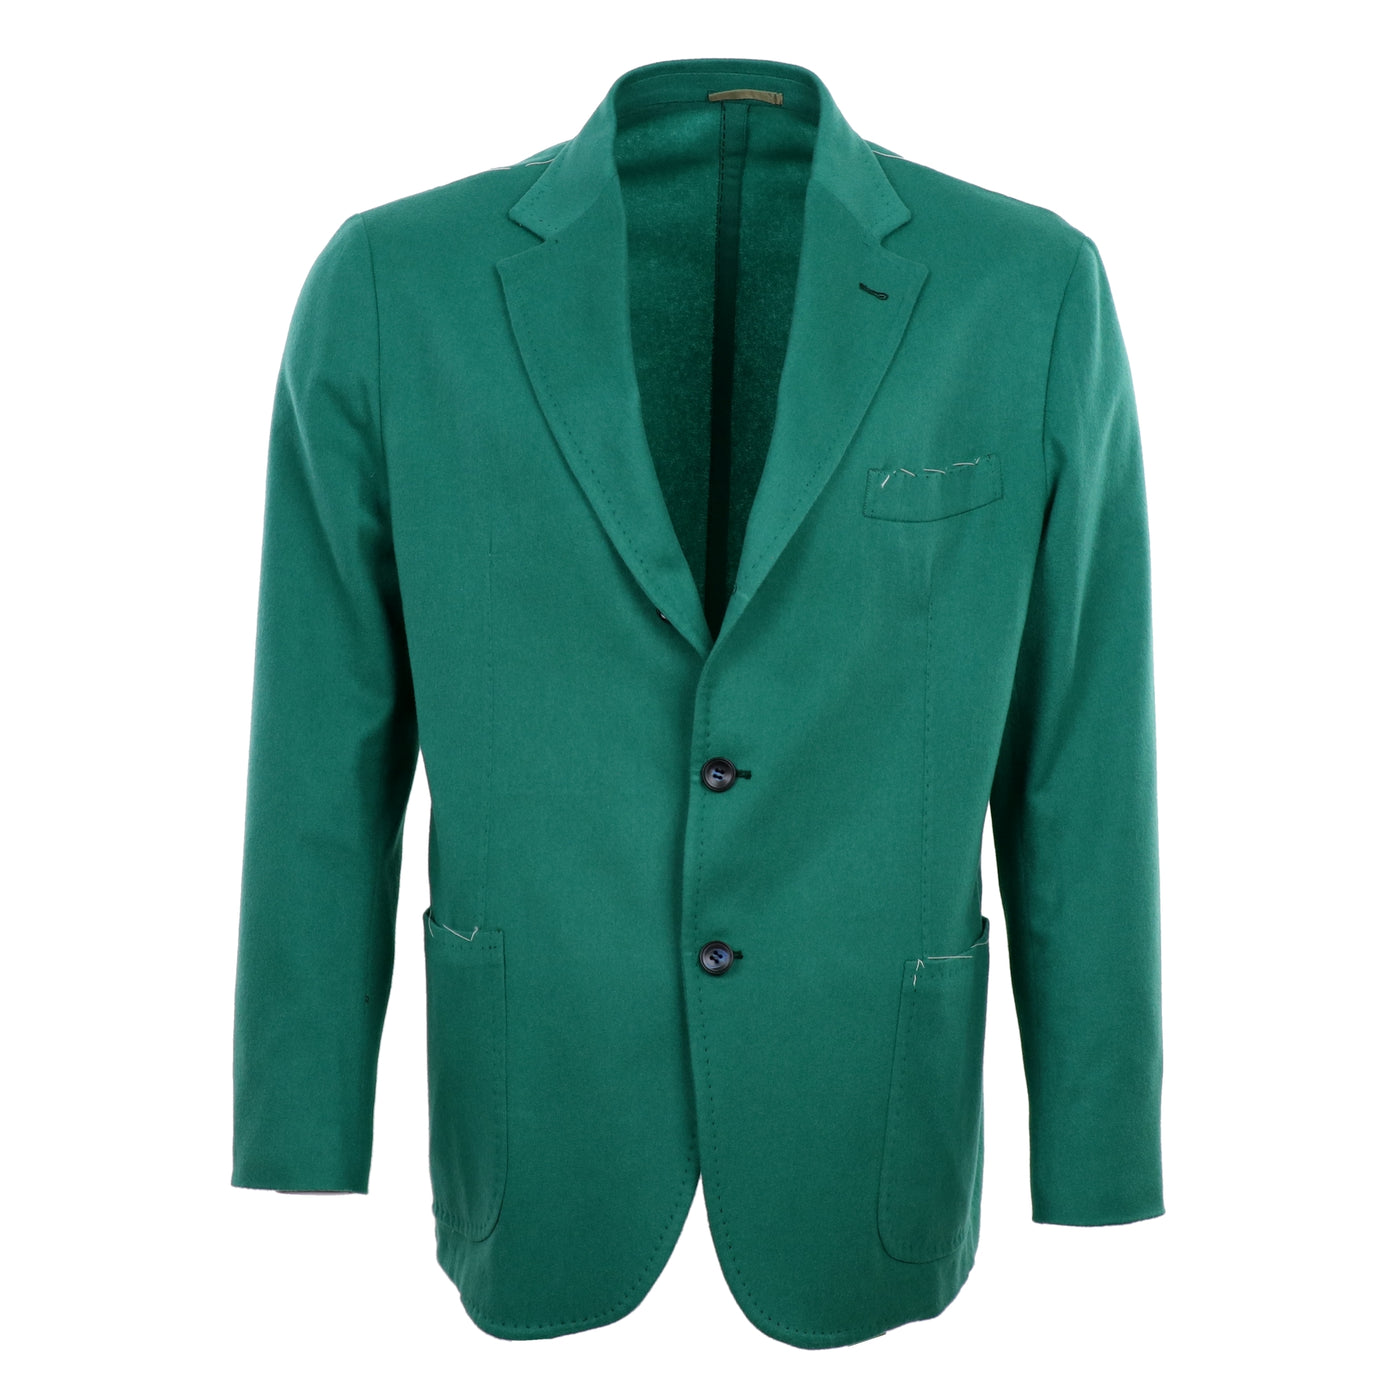 Summer Cashmere Soft Coat in Emerald Green Size 48R